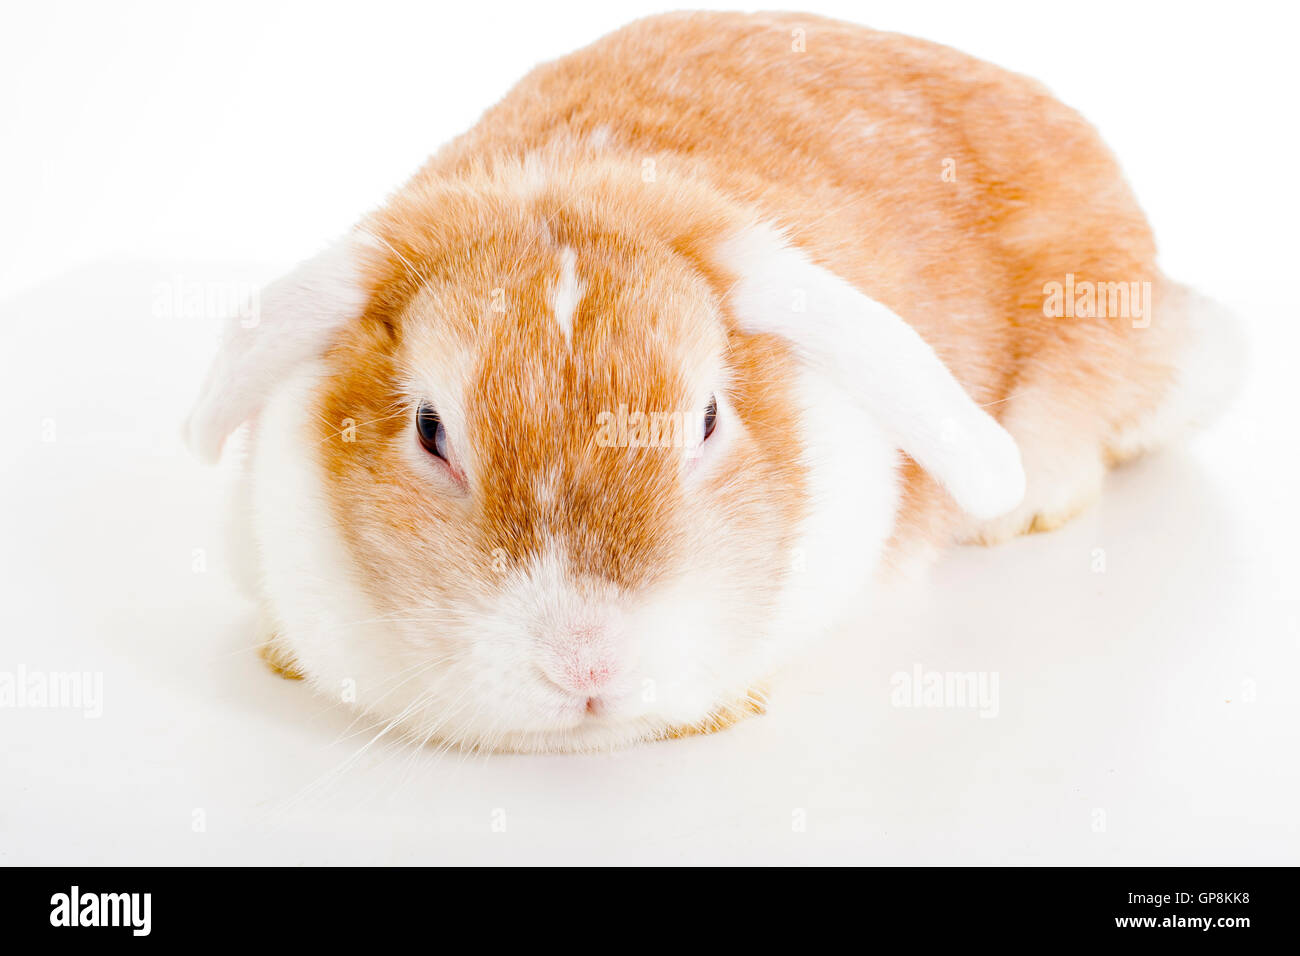 Trained pet white background studio photography. Cute animals close up photos. Purebreed show animal.'wo'ear eared funny bunny Stock Photo